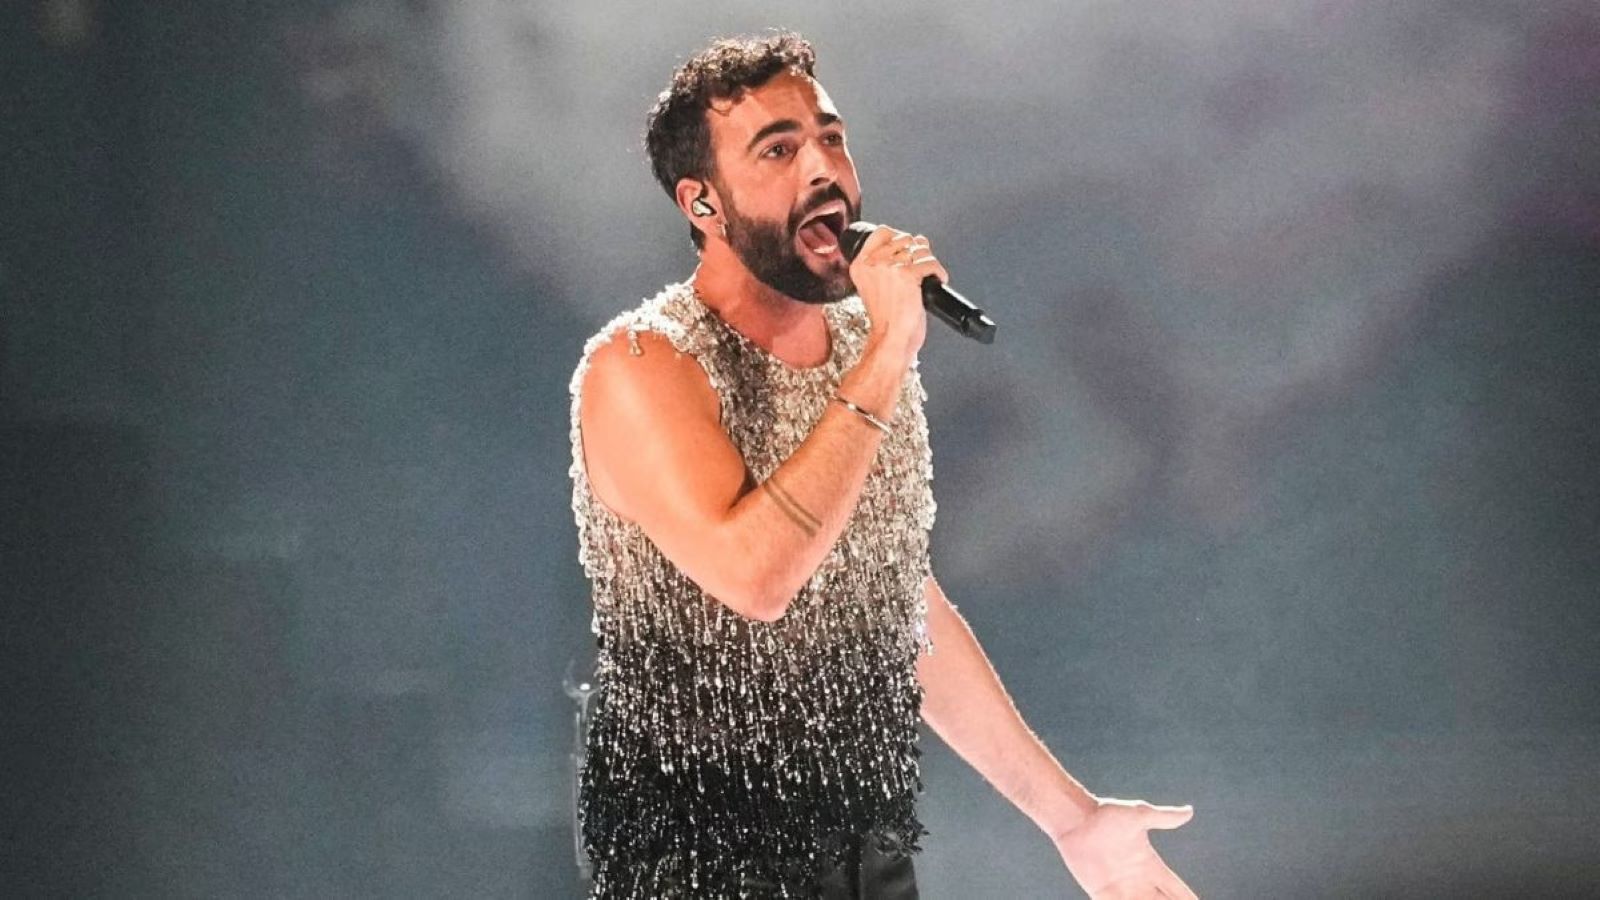 Eurovision Song Contest 2023: here are the ten finalist countries after the first evening